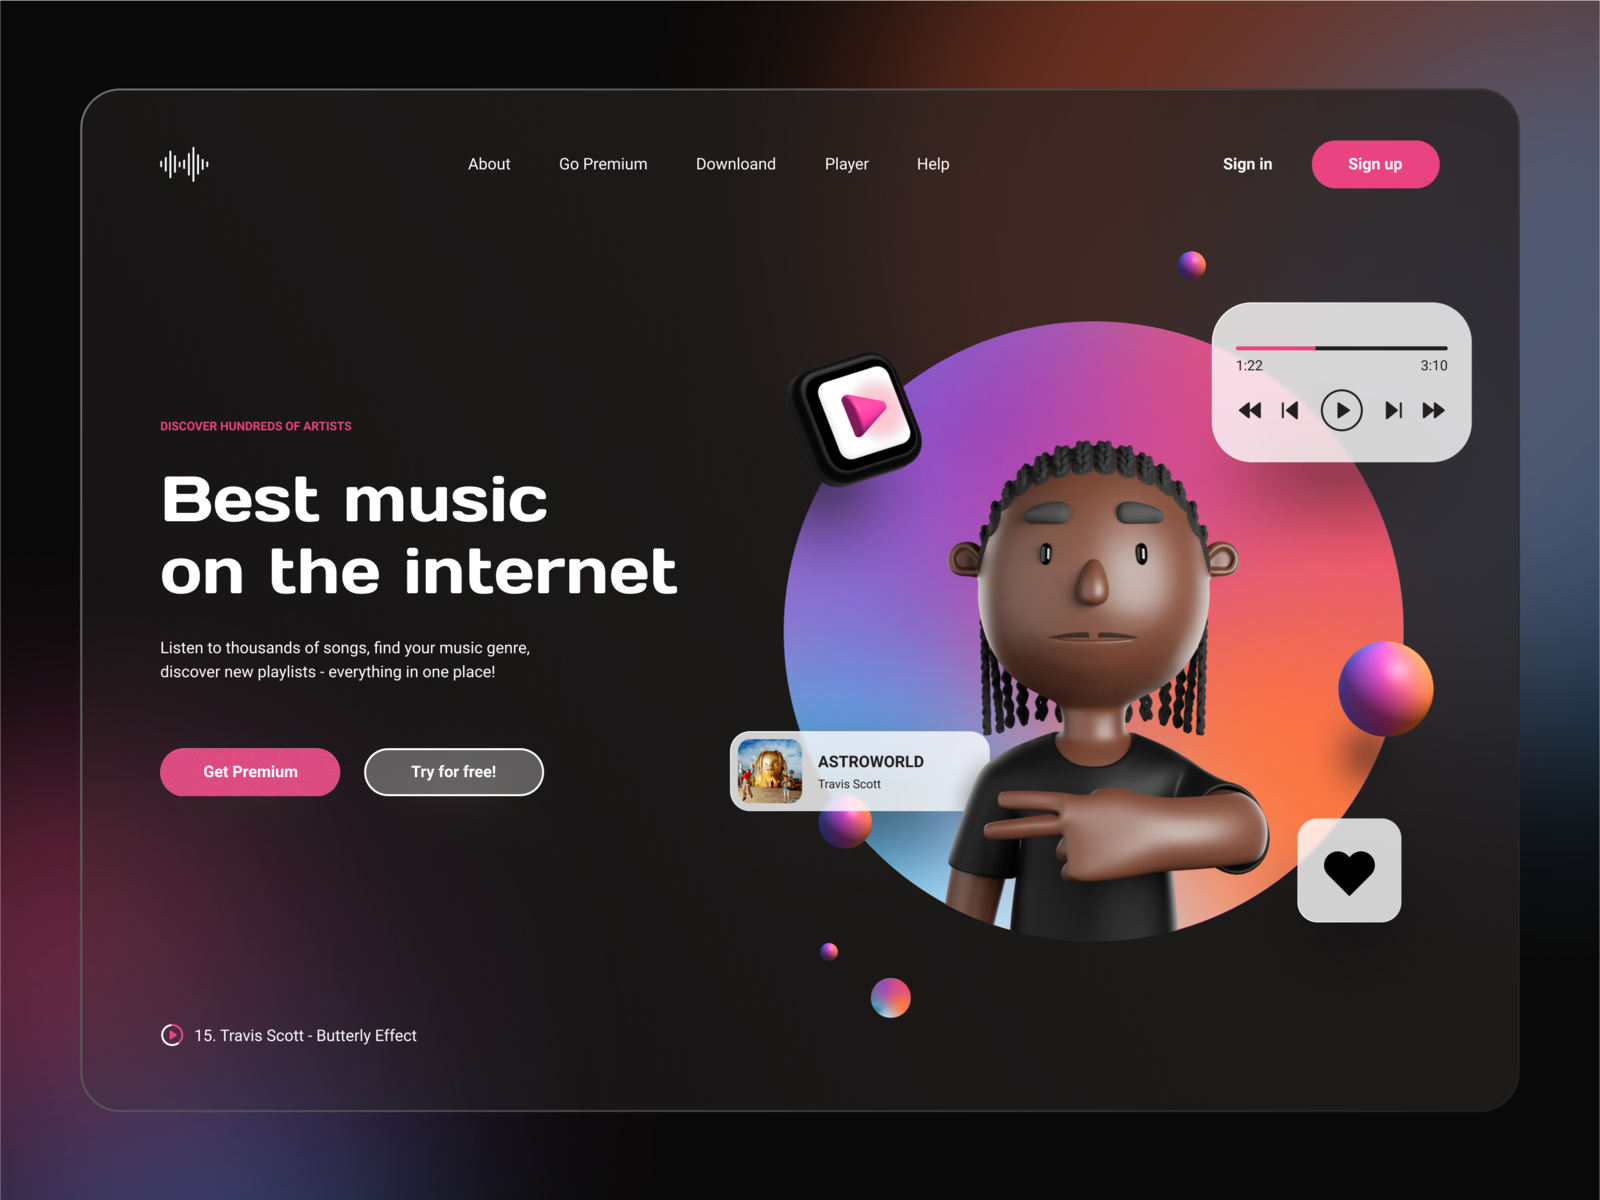 music-player-app-website-by-bogus-aw-podhalicz-on-dribbble